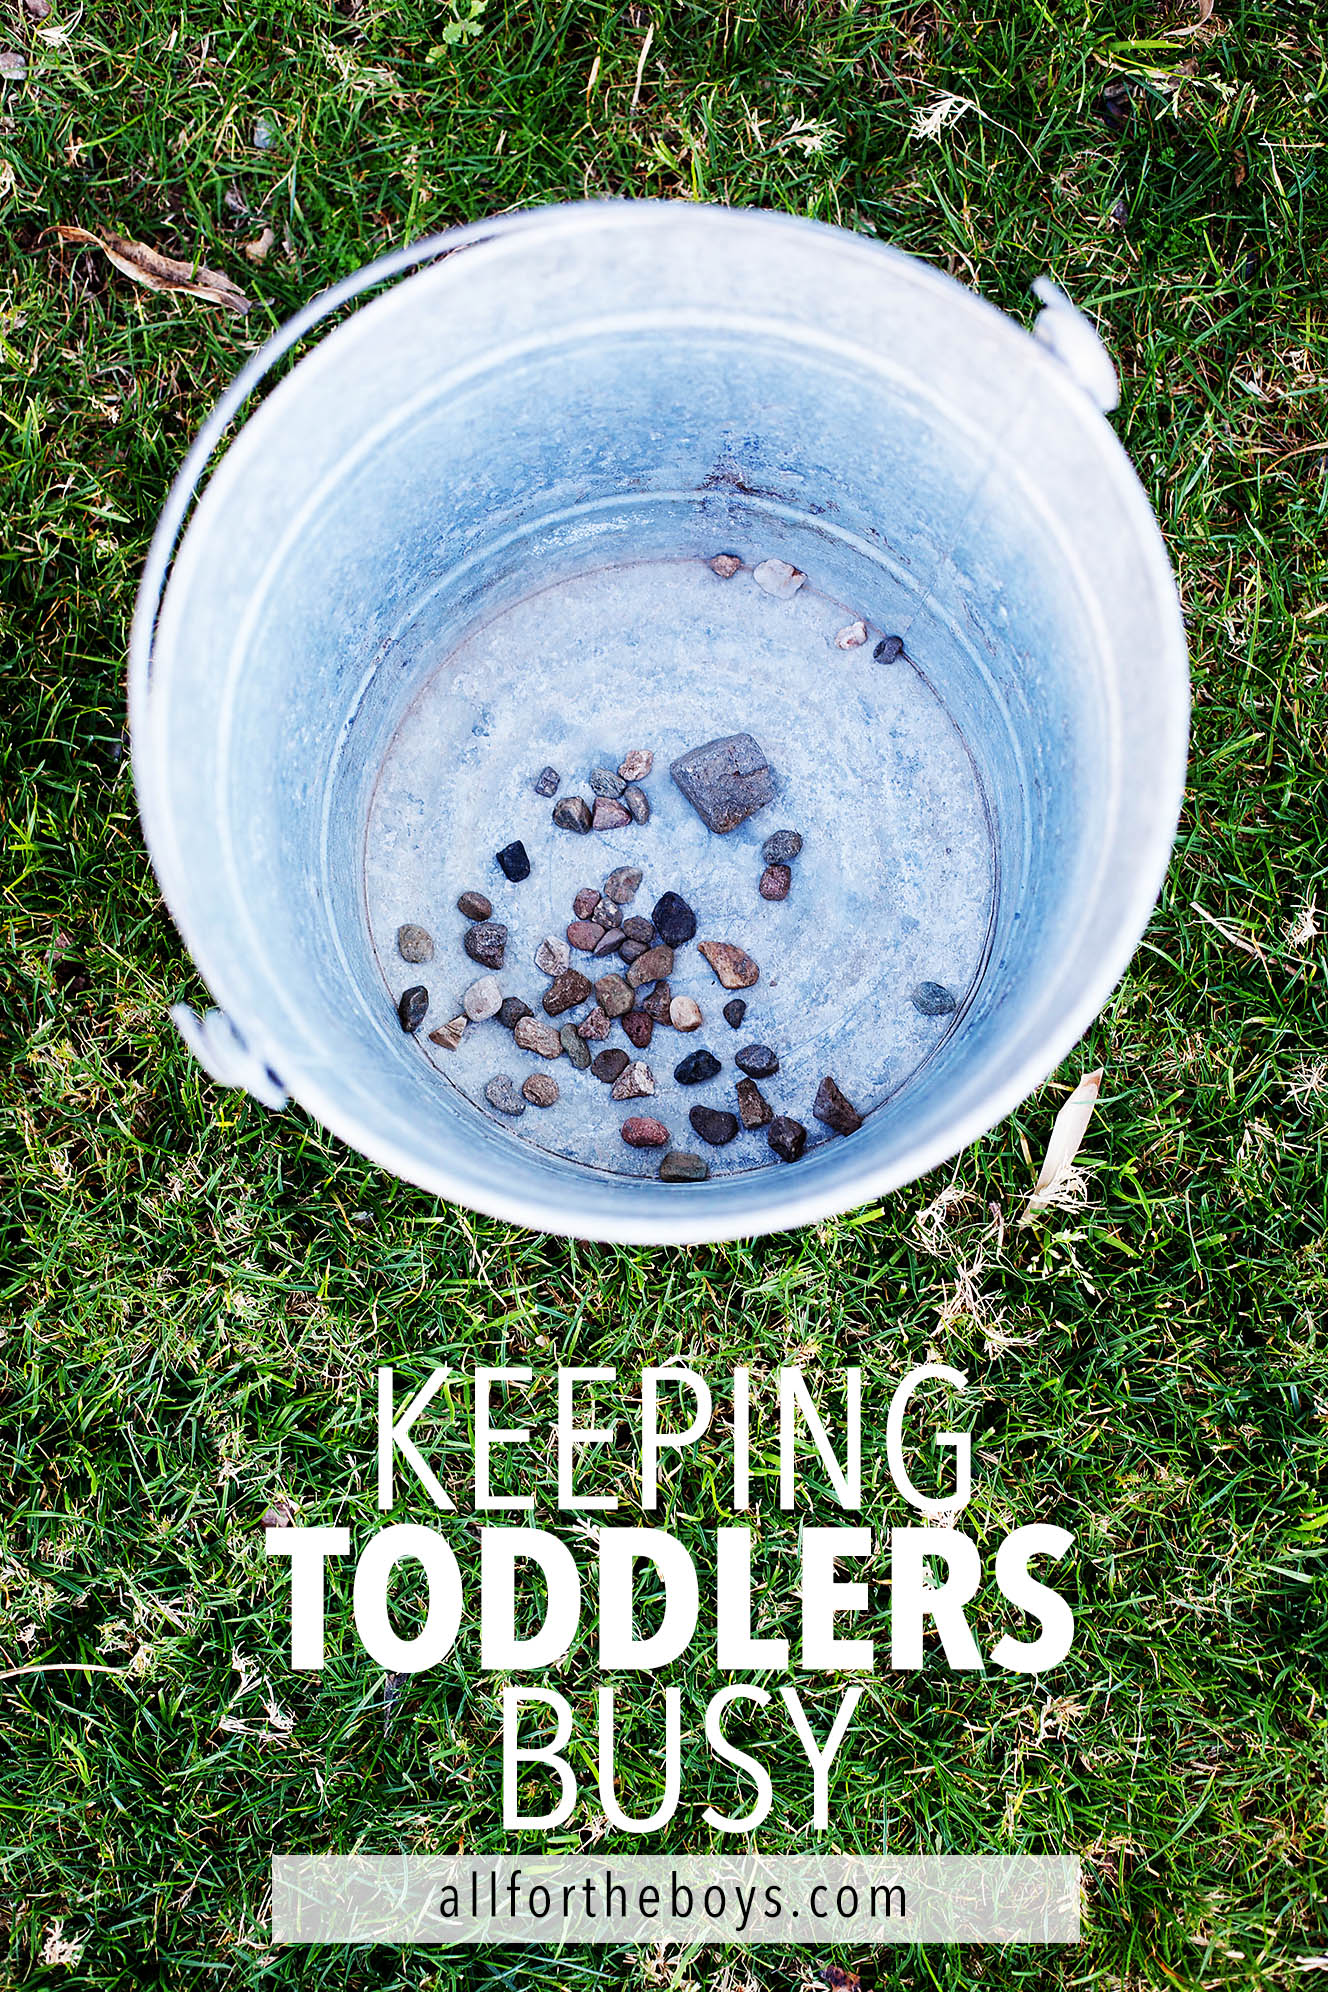 Keeping toddlers busy